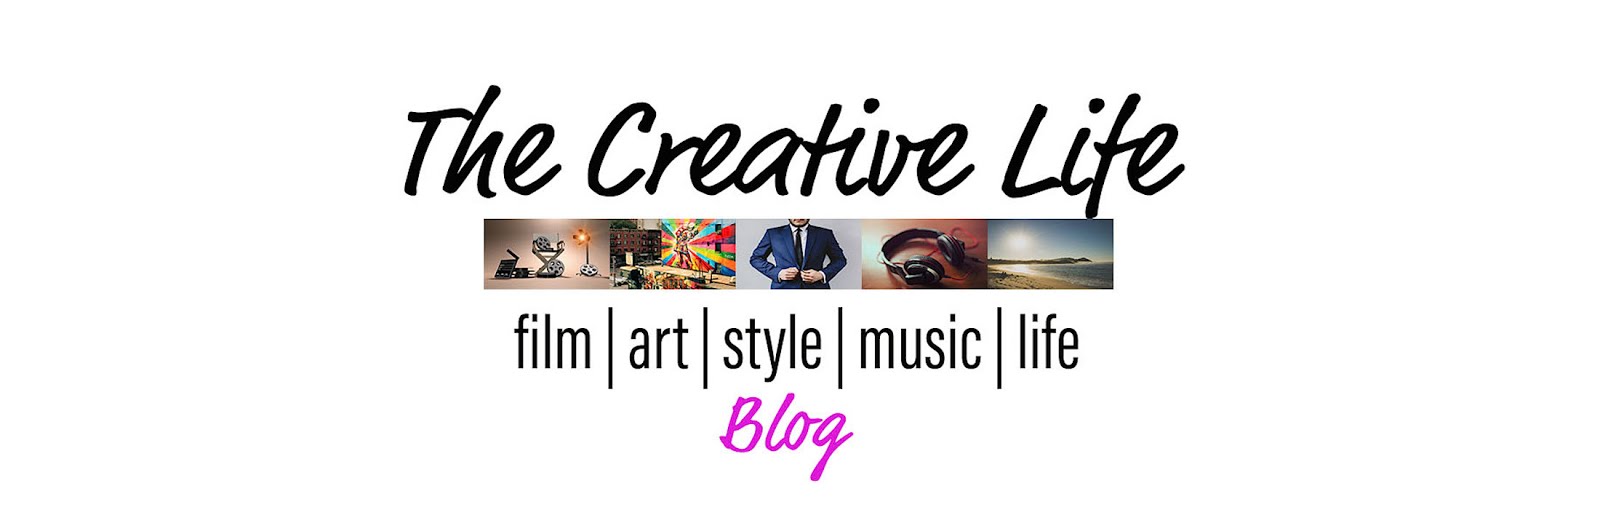 TheCreativeLife | blog. UNDER CONSTRUCTION - COMING SOON 2016